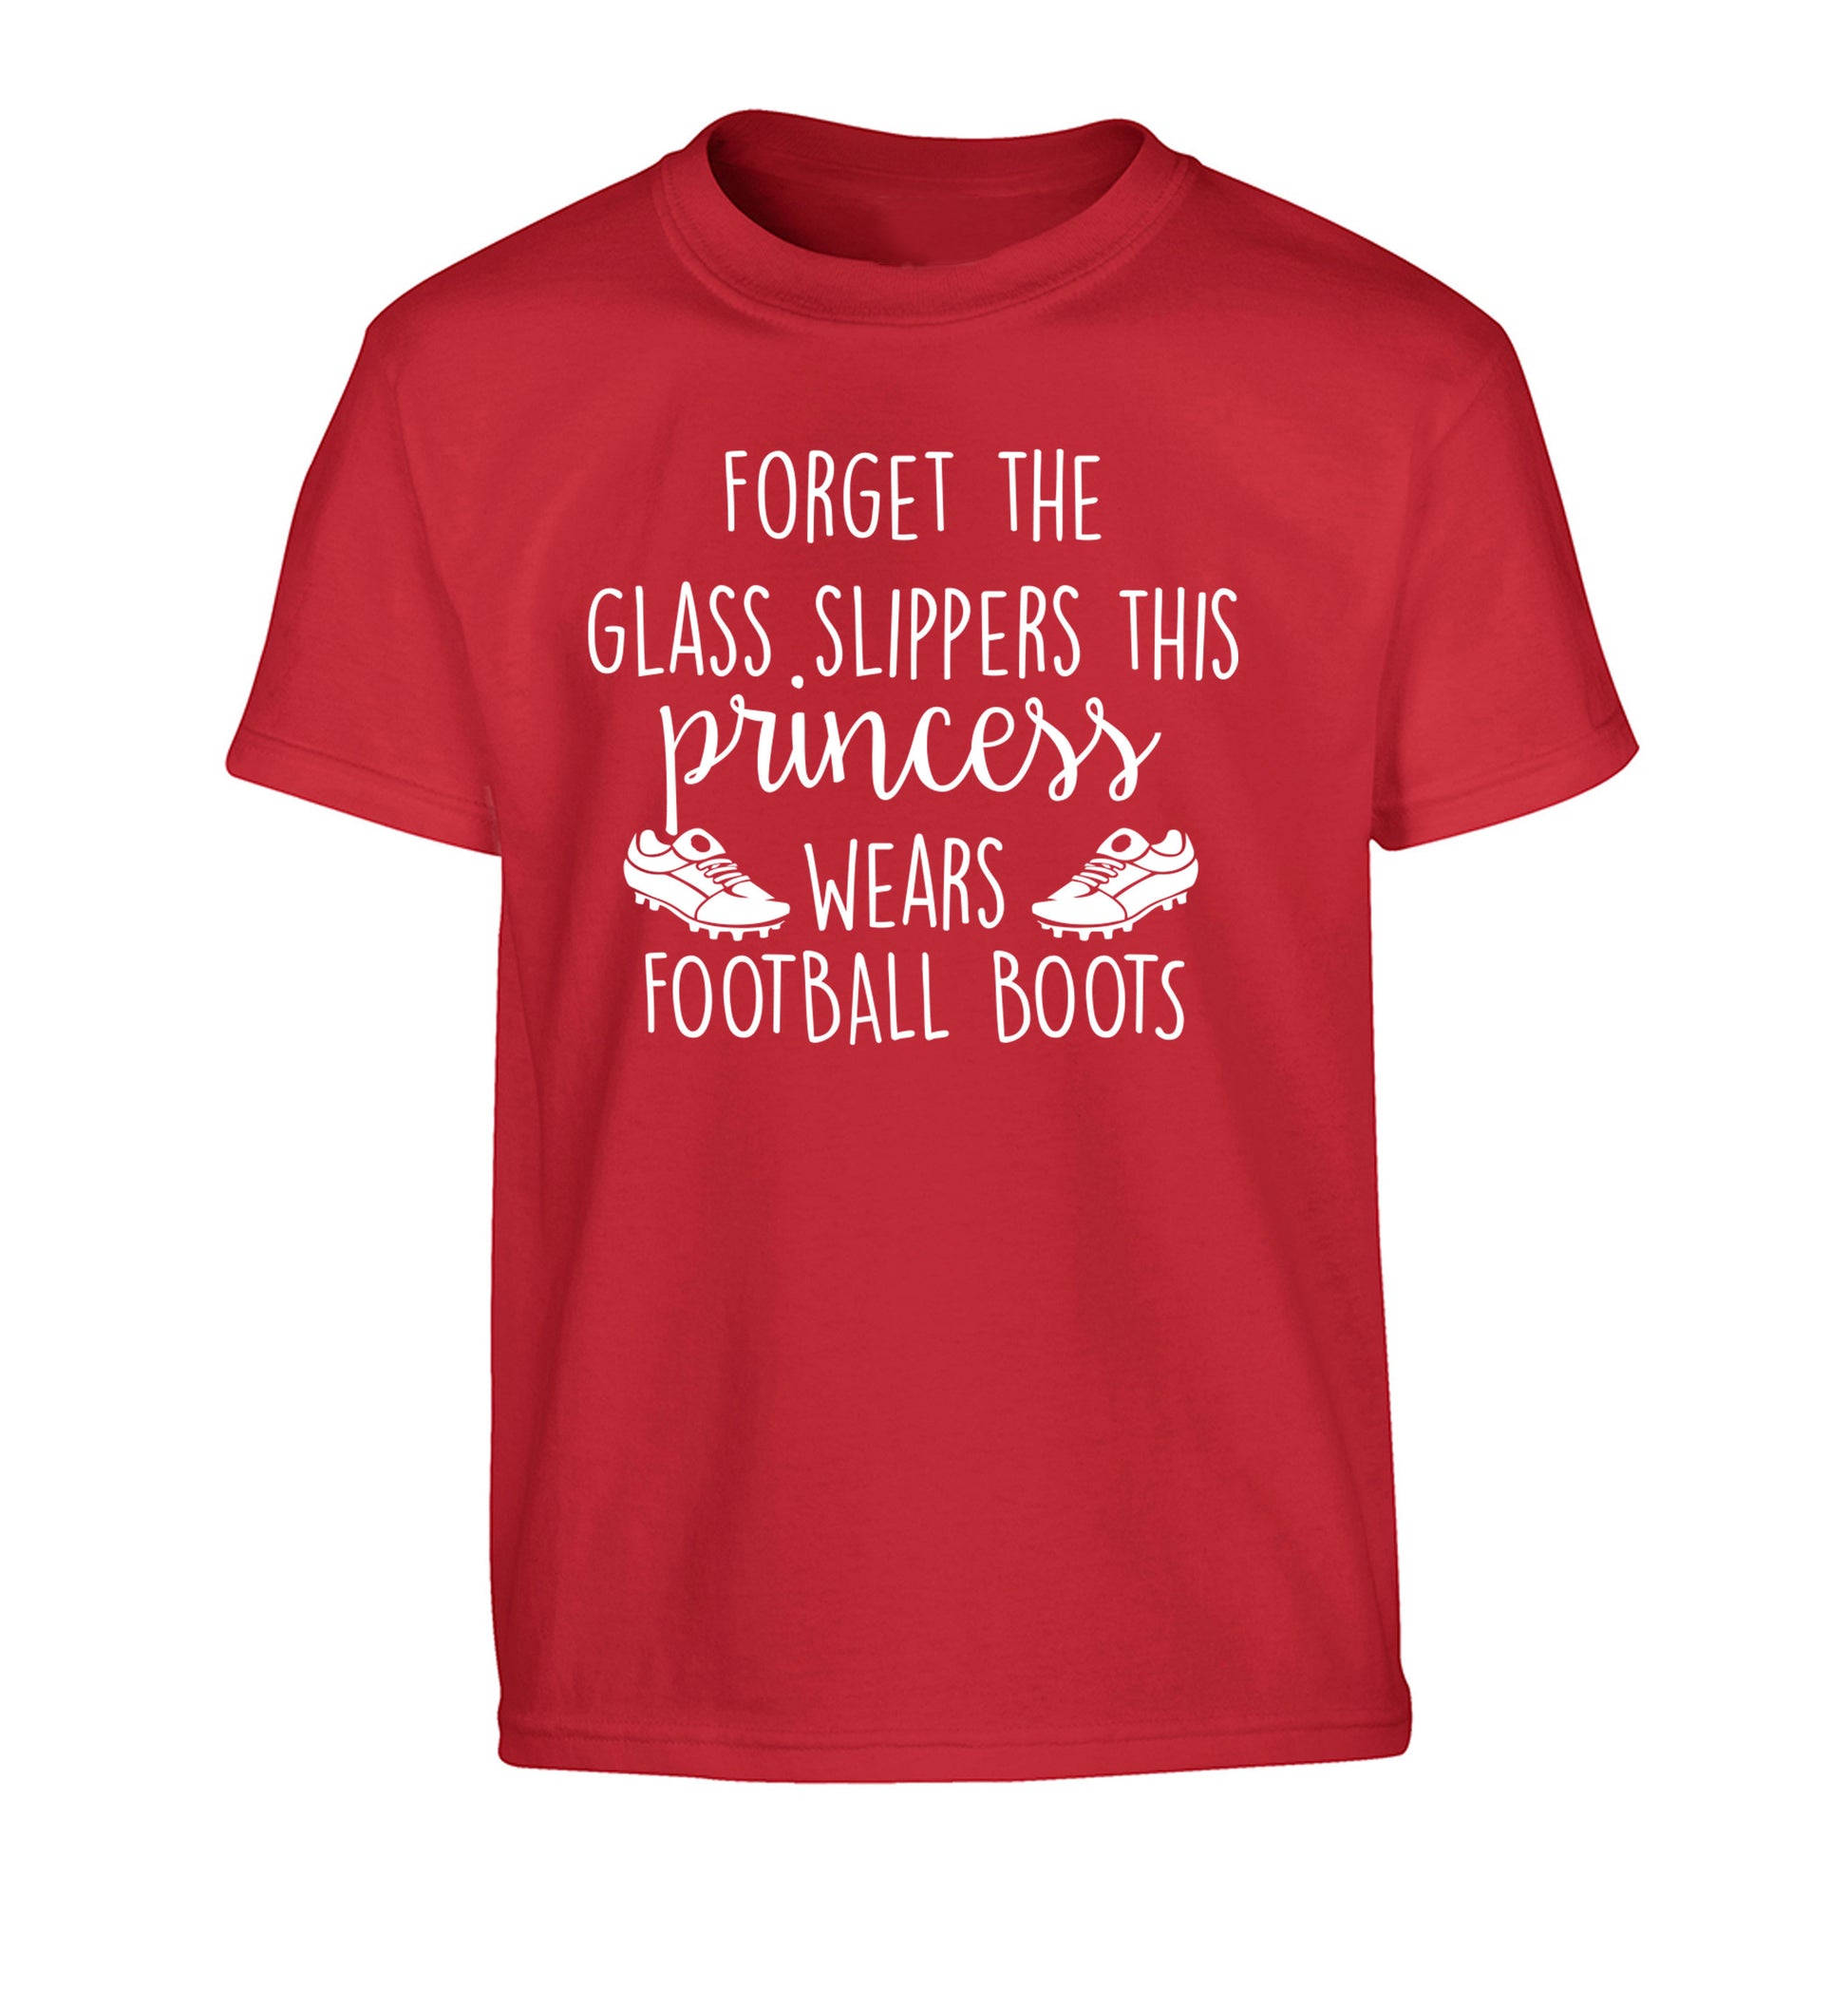 Forget the glass slippers this princess wears football boots Children's red Tshirt 12-14 Years